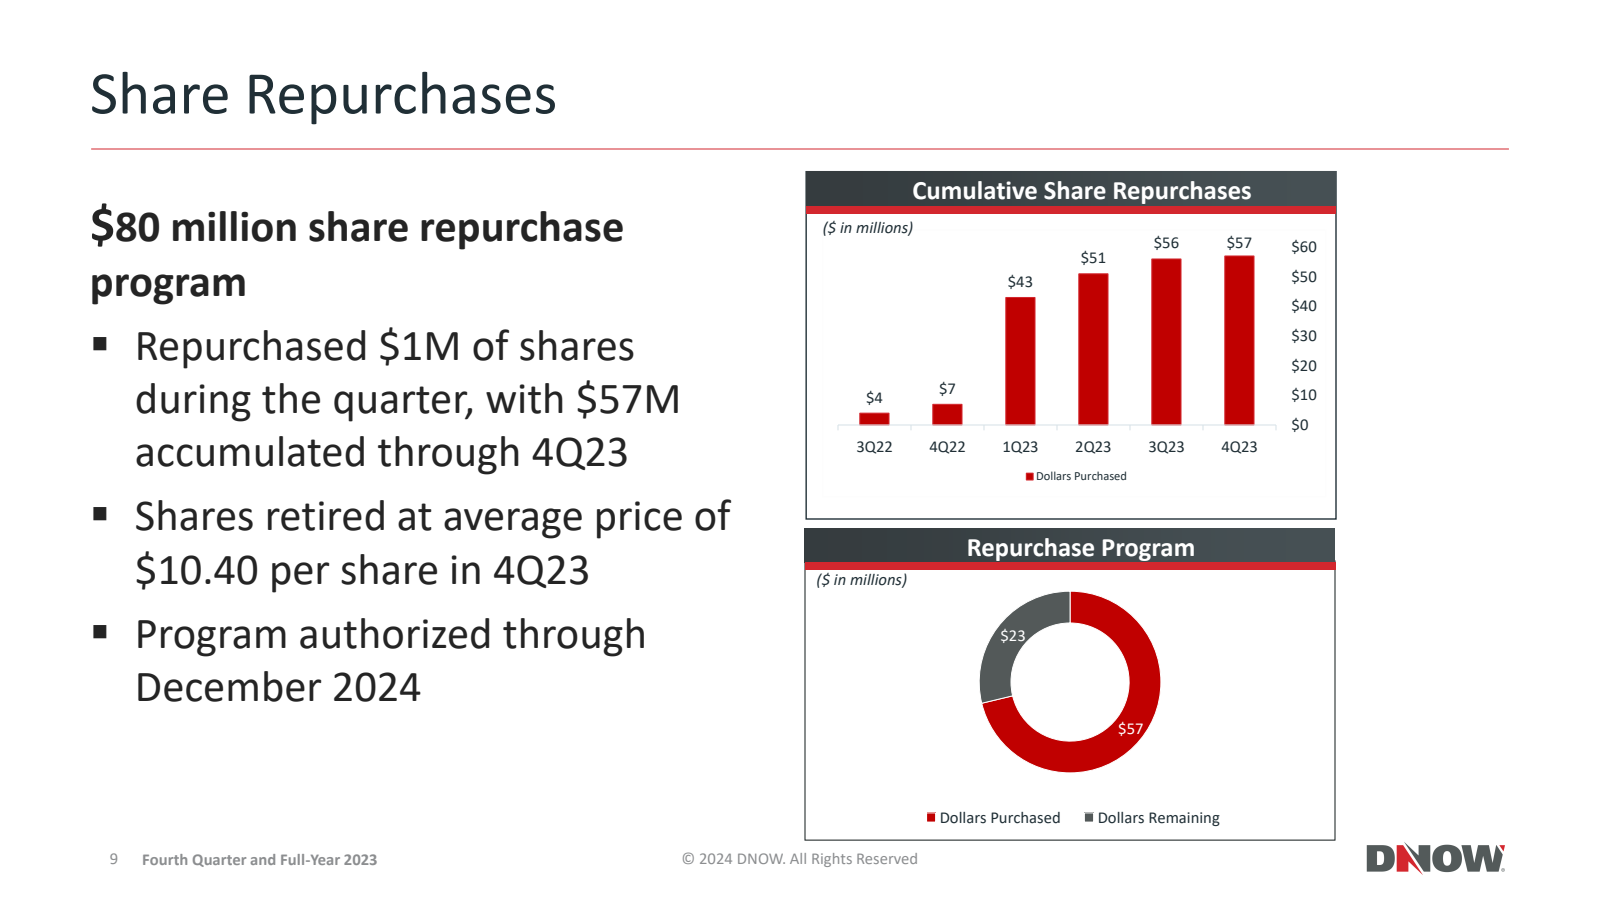 Share Repurchases 
$